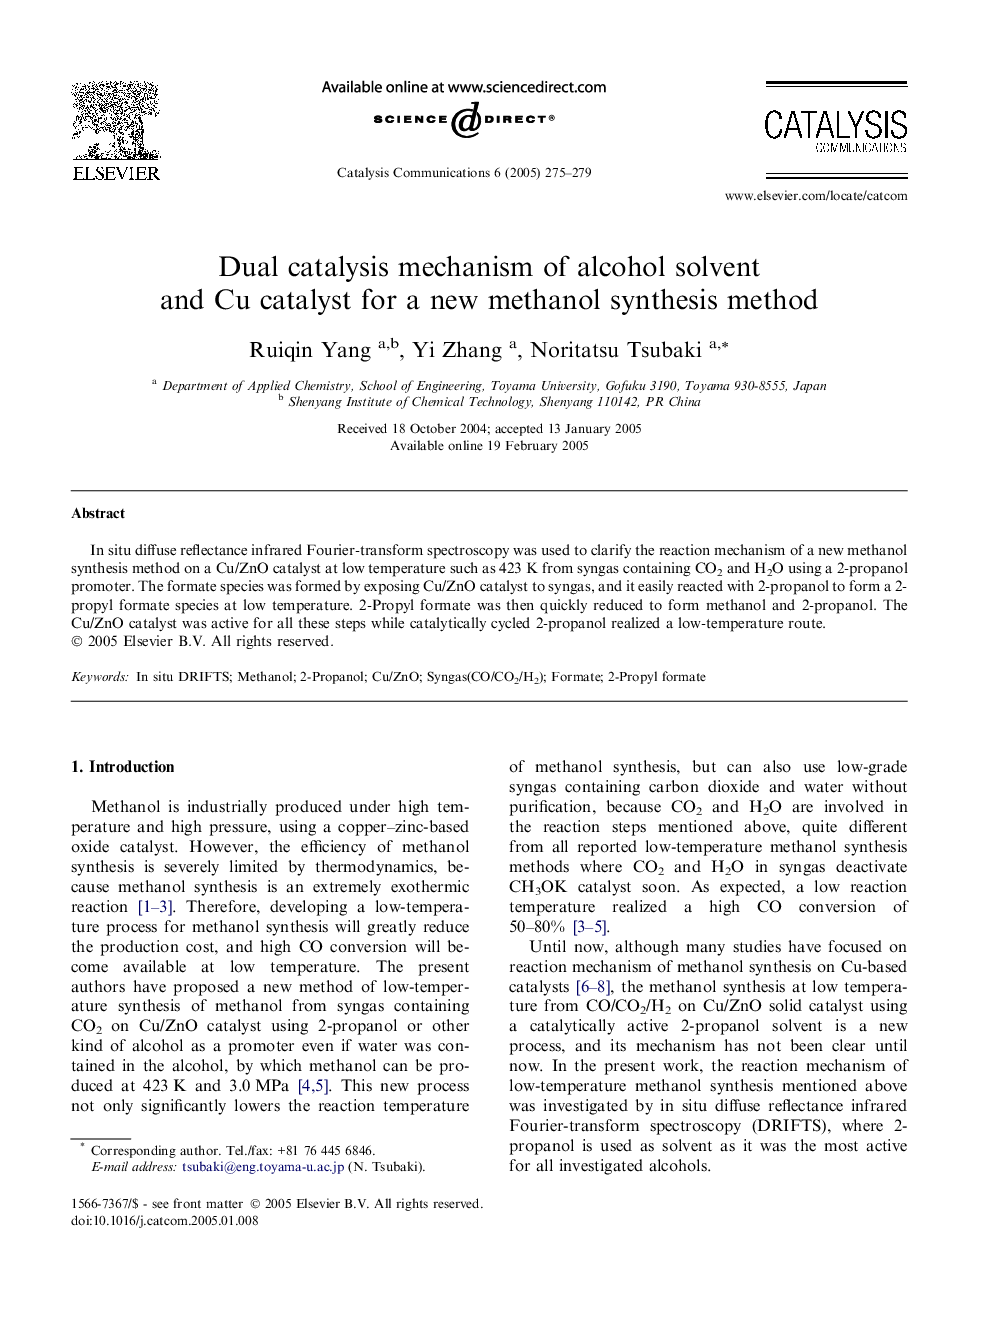 Dual catalysis mechanism of alcohol solvent and Cu catalyst for a new methanol synthesis method